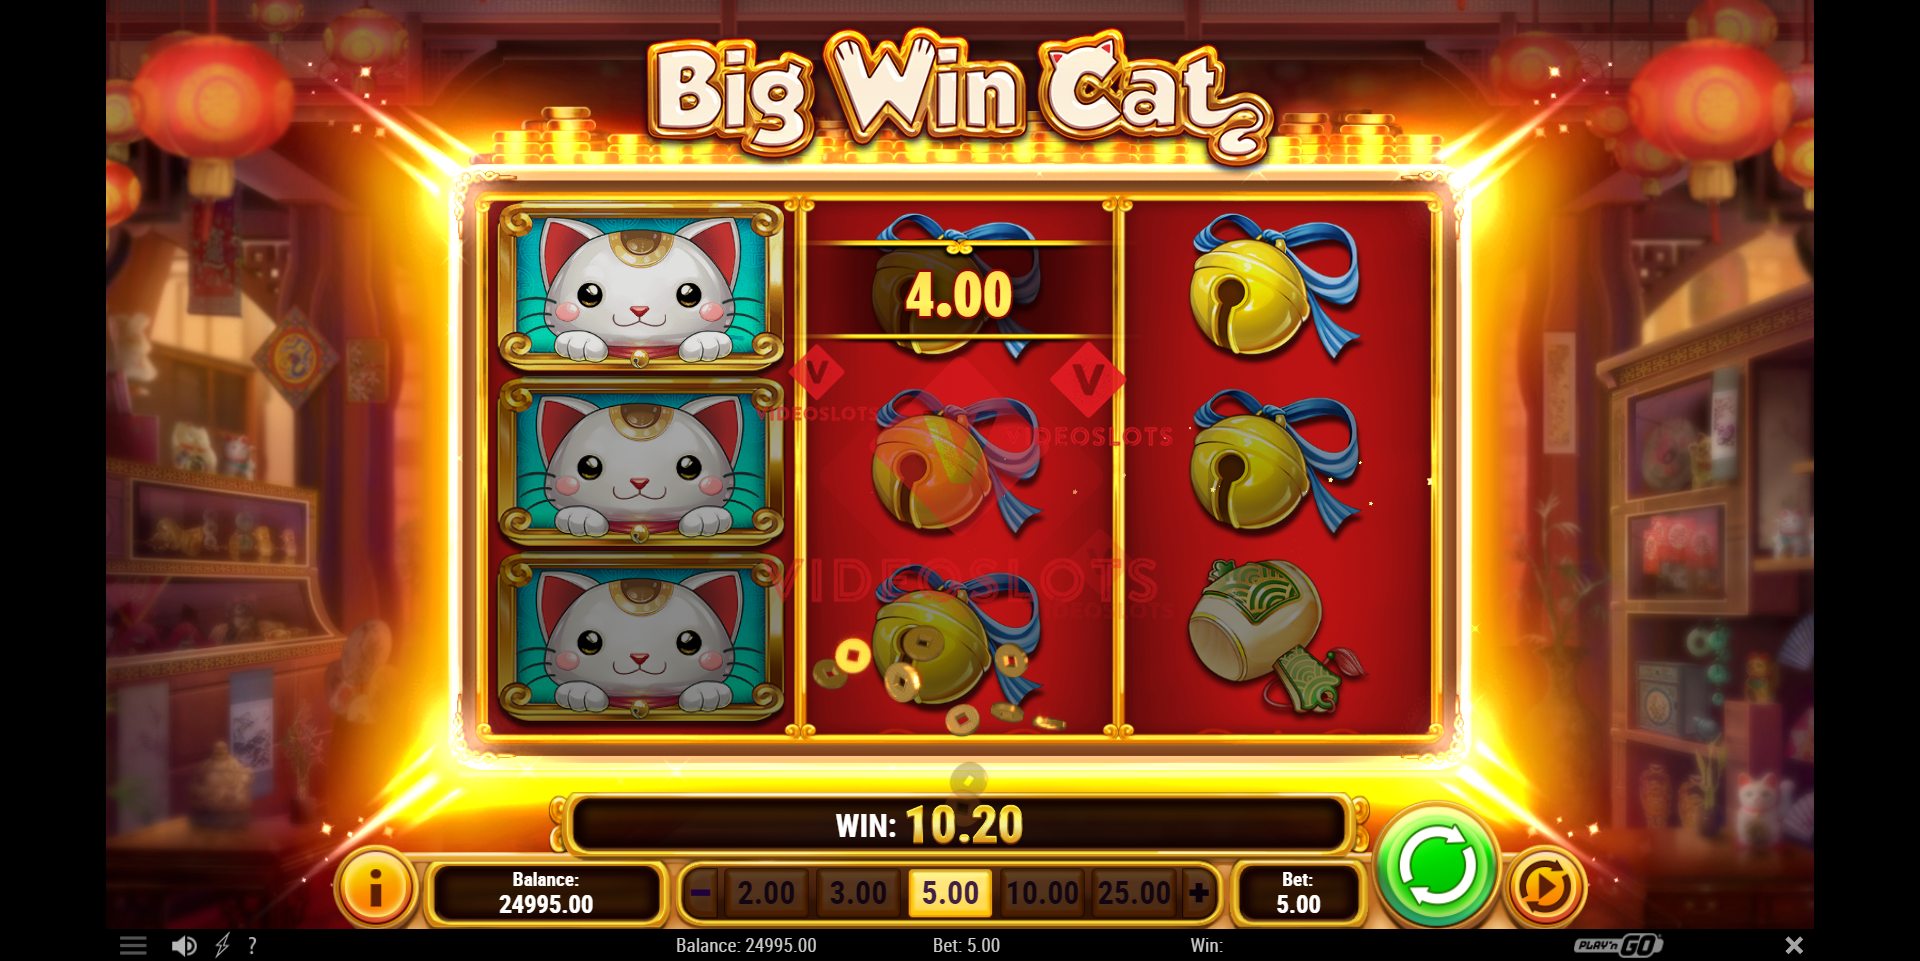 Base Game for Big Win Cat slot from Play'n Go